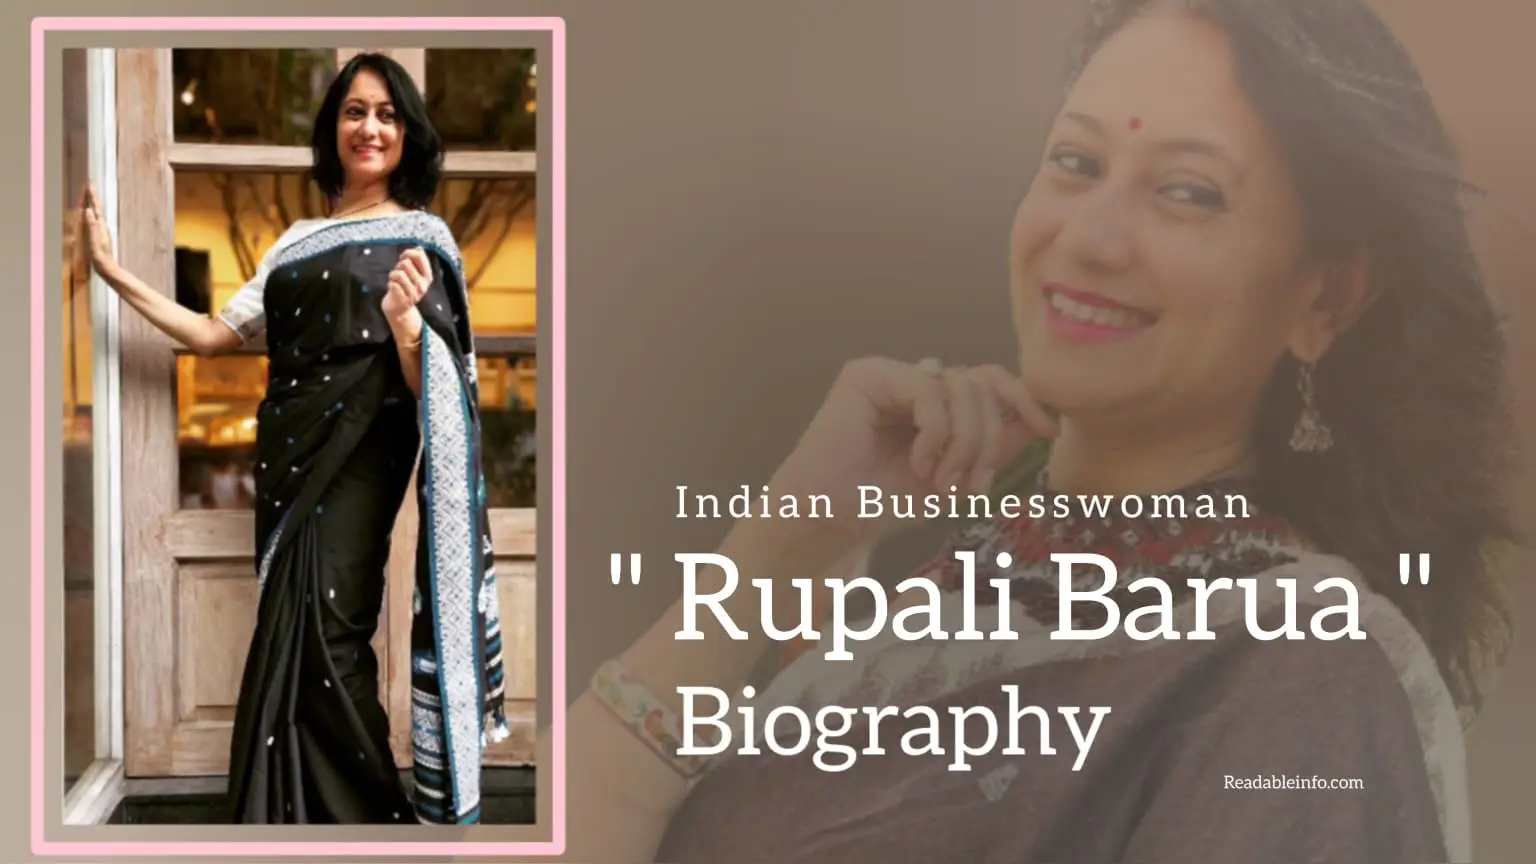 You are currently viewing Rupali Barua Biography (Indian businesswoman)